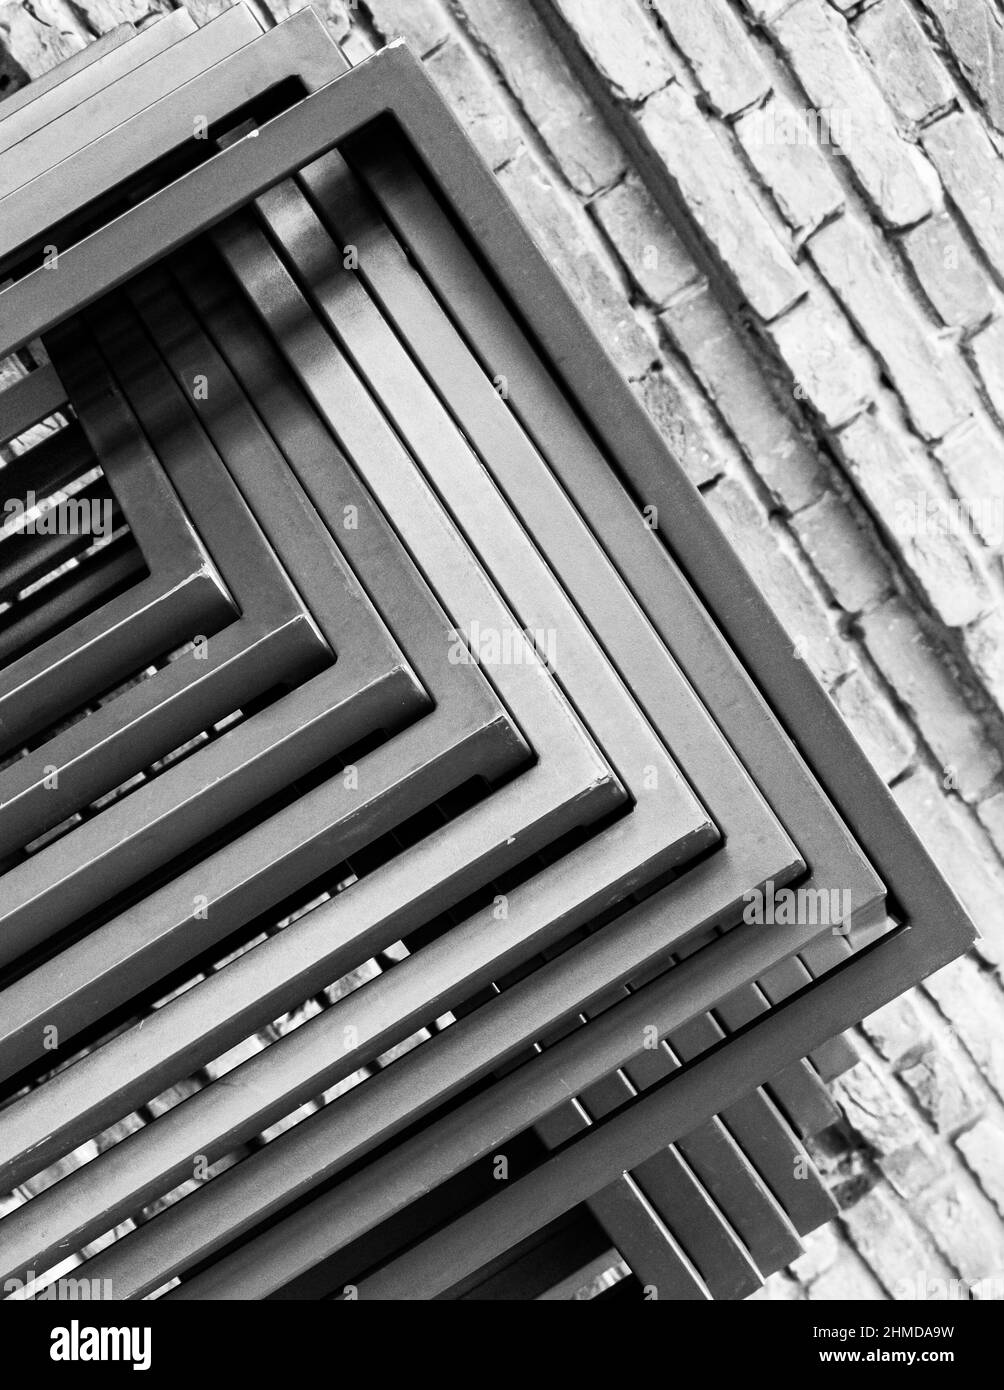 Geometric abstraction from several metal straight rods against the background of a brick wall. Black and white photo Stock Photo